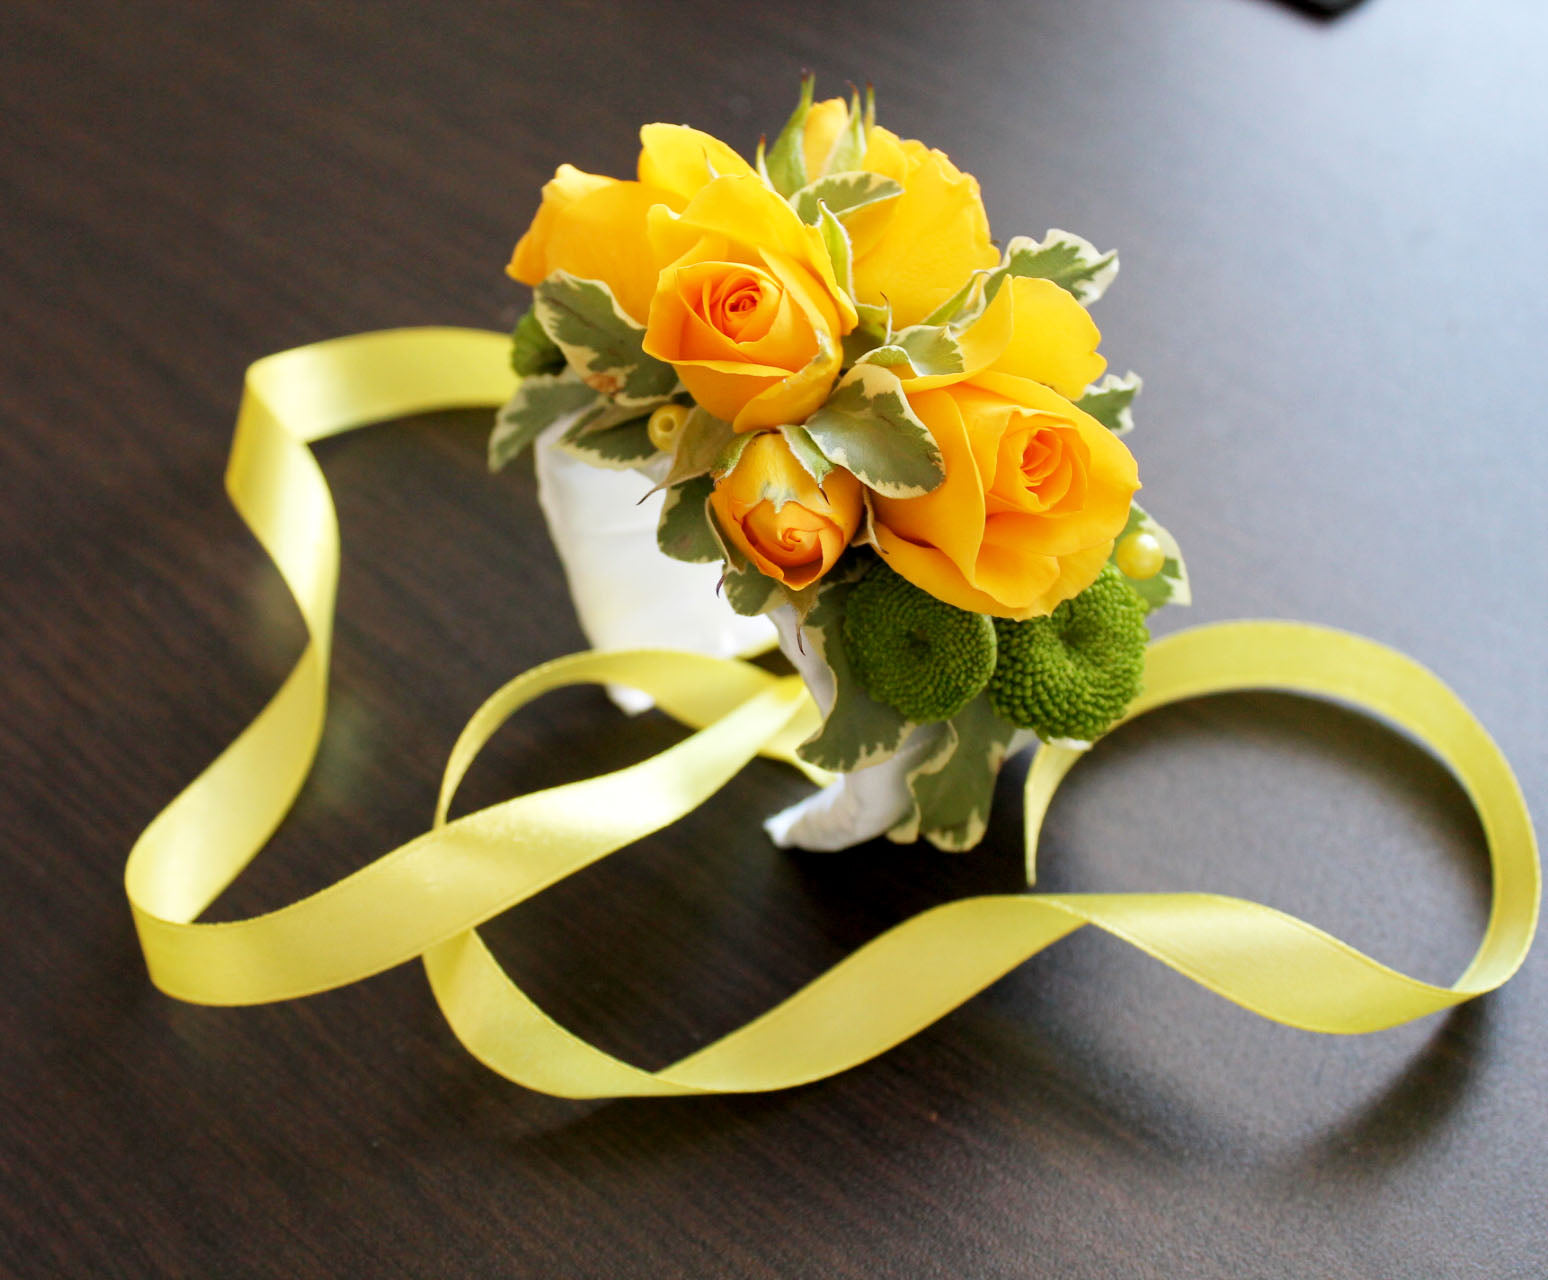 Sunny yellow roses mirror your happiness.    Yellow spray rosesd and daisies.